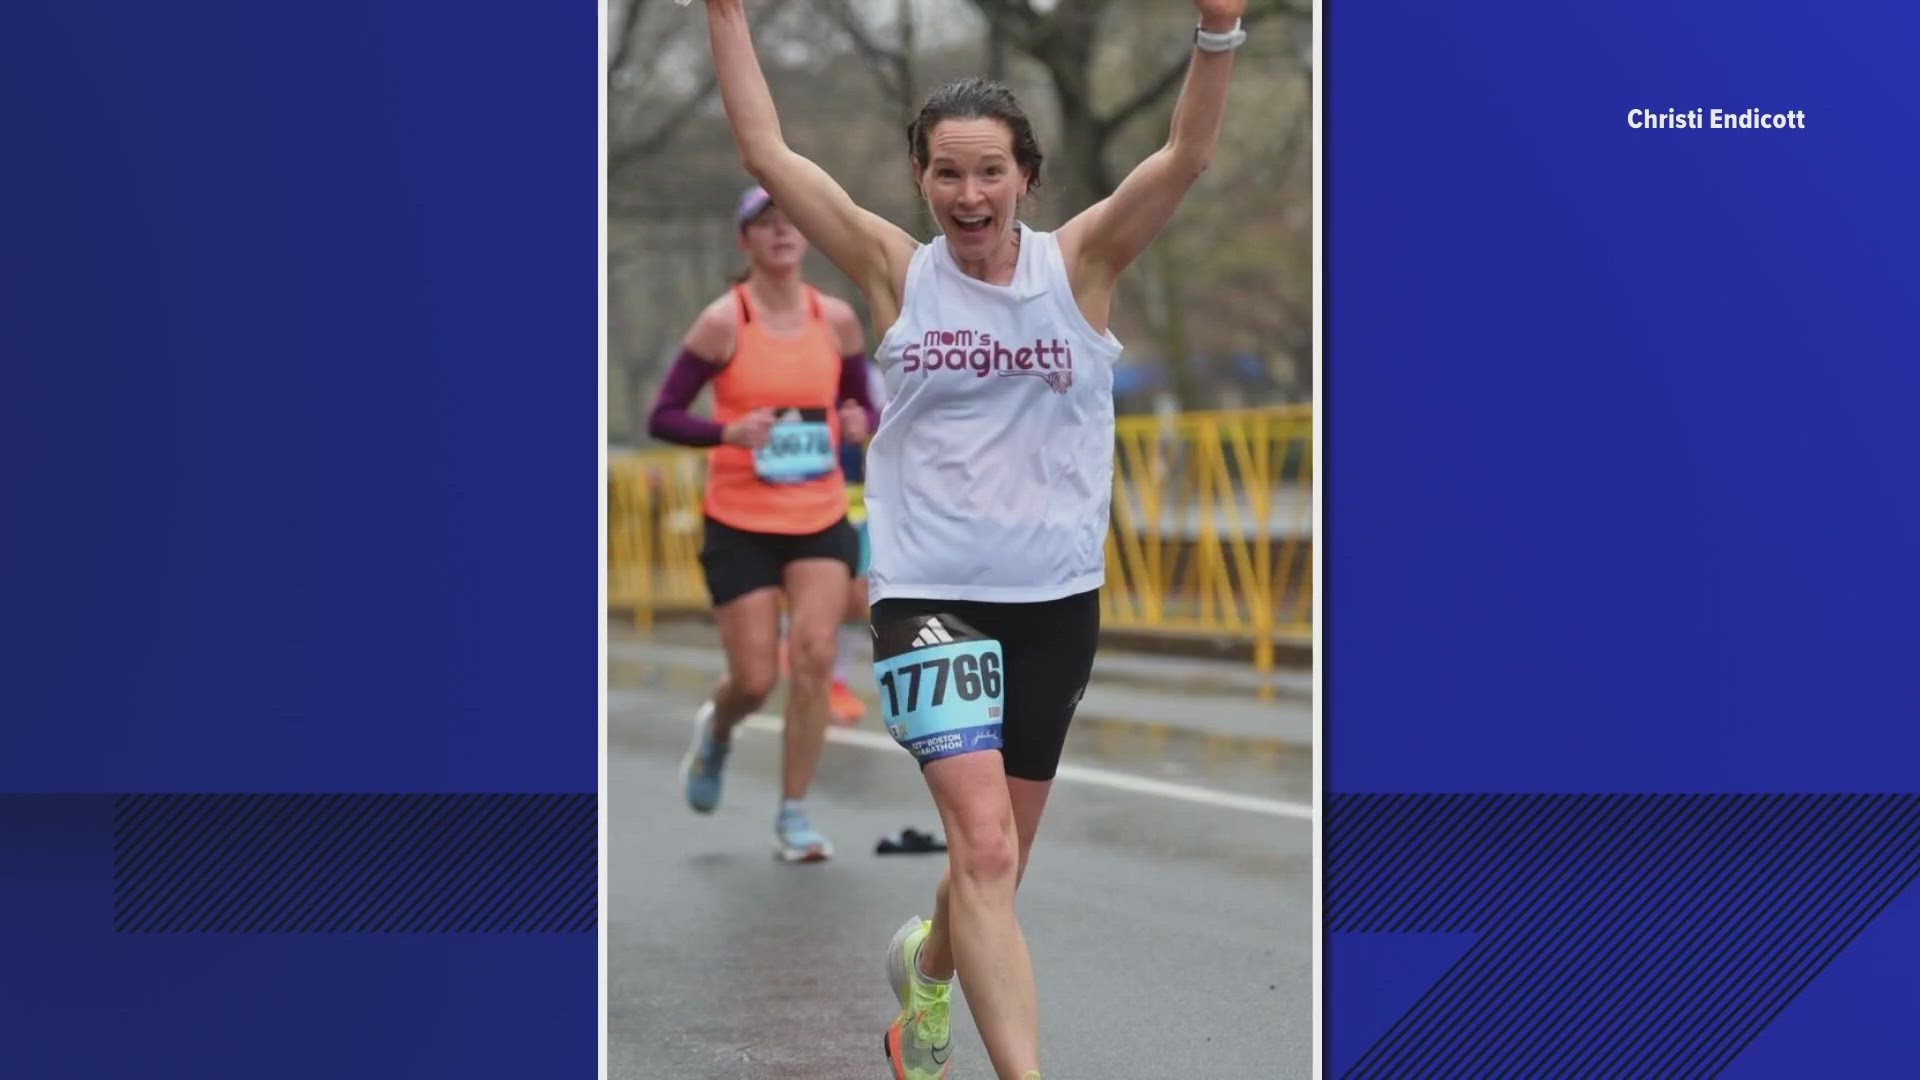 Christi is now cancer-free and was able to run the Boston Marathon this year with her husband.